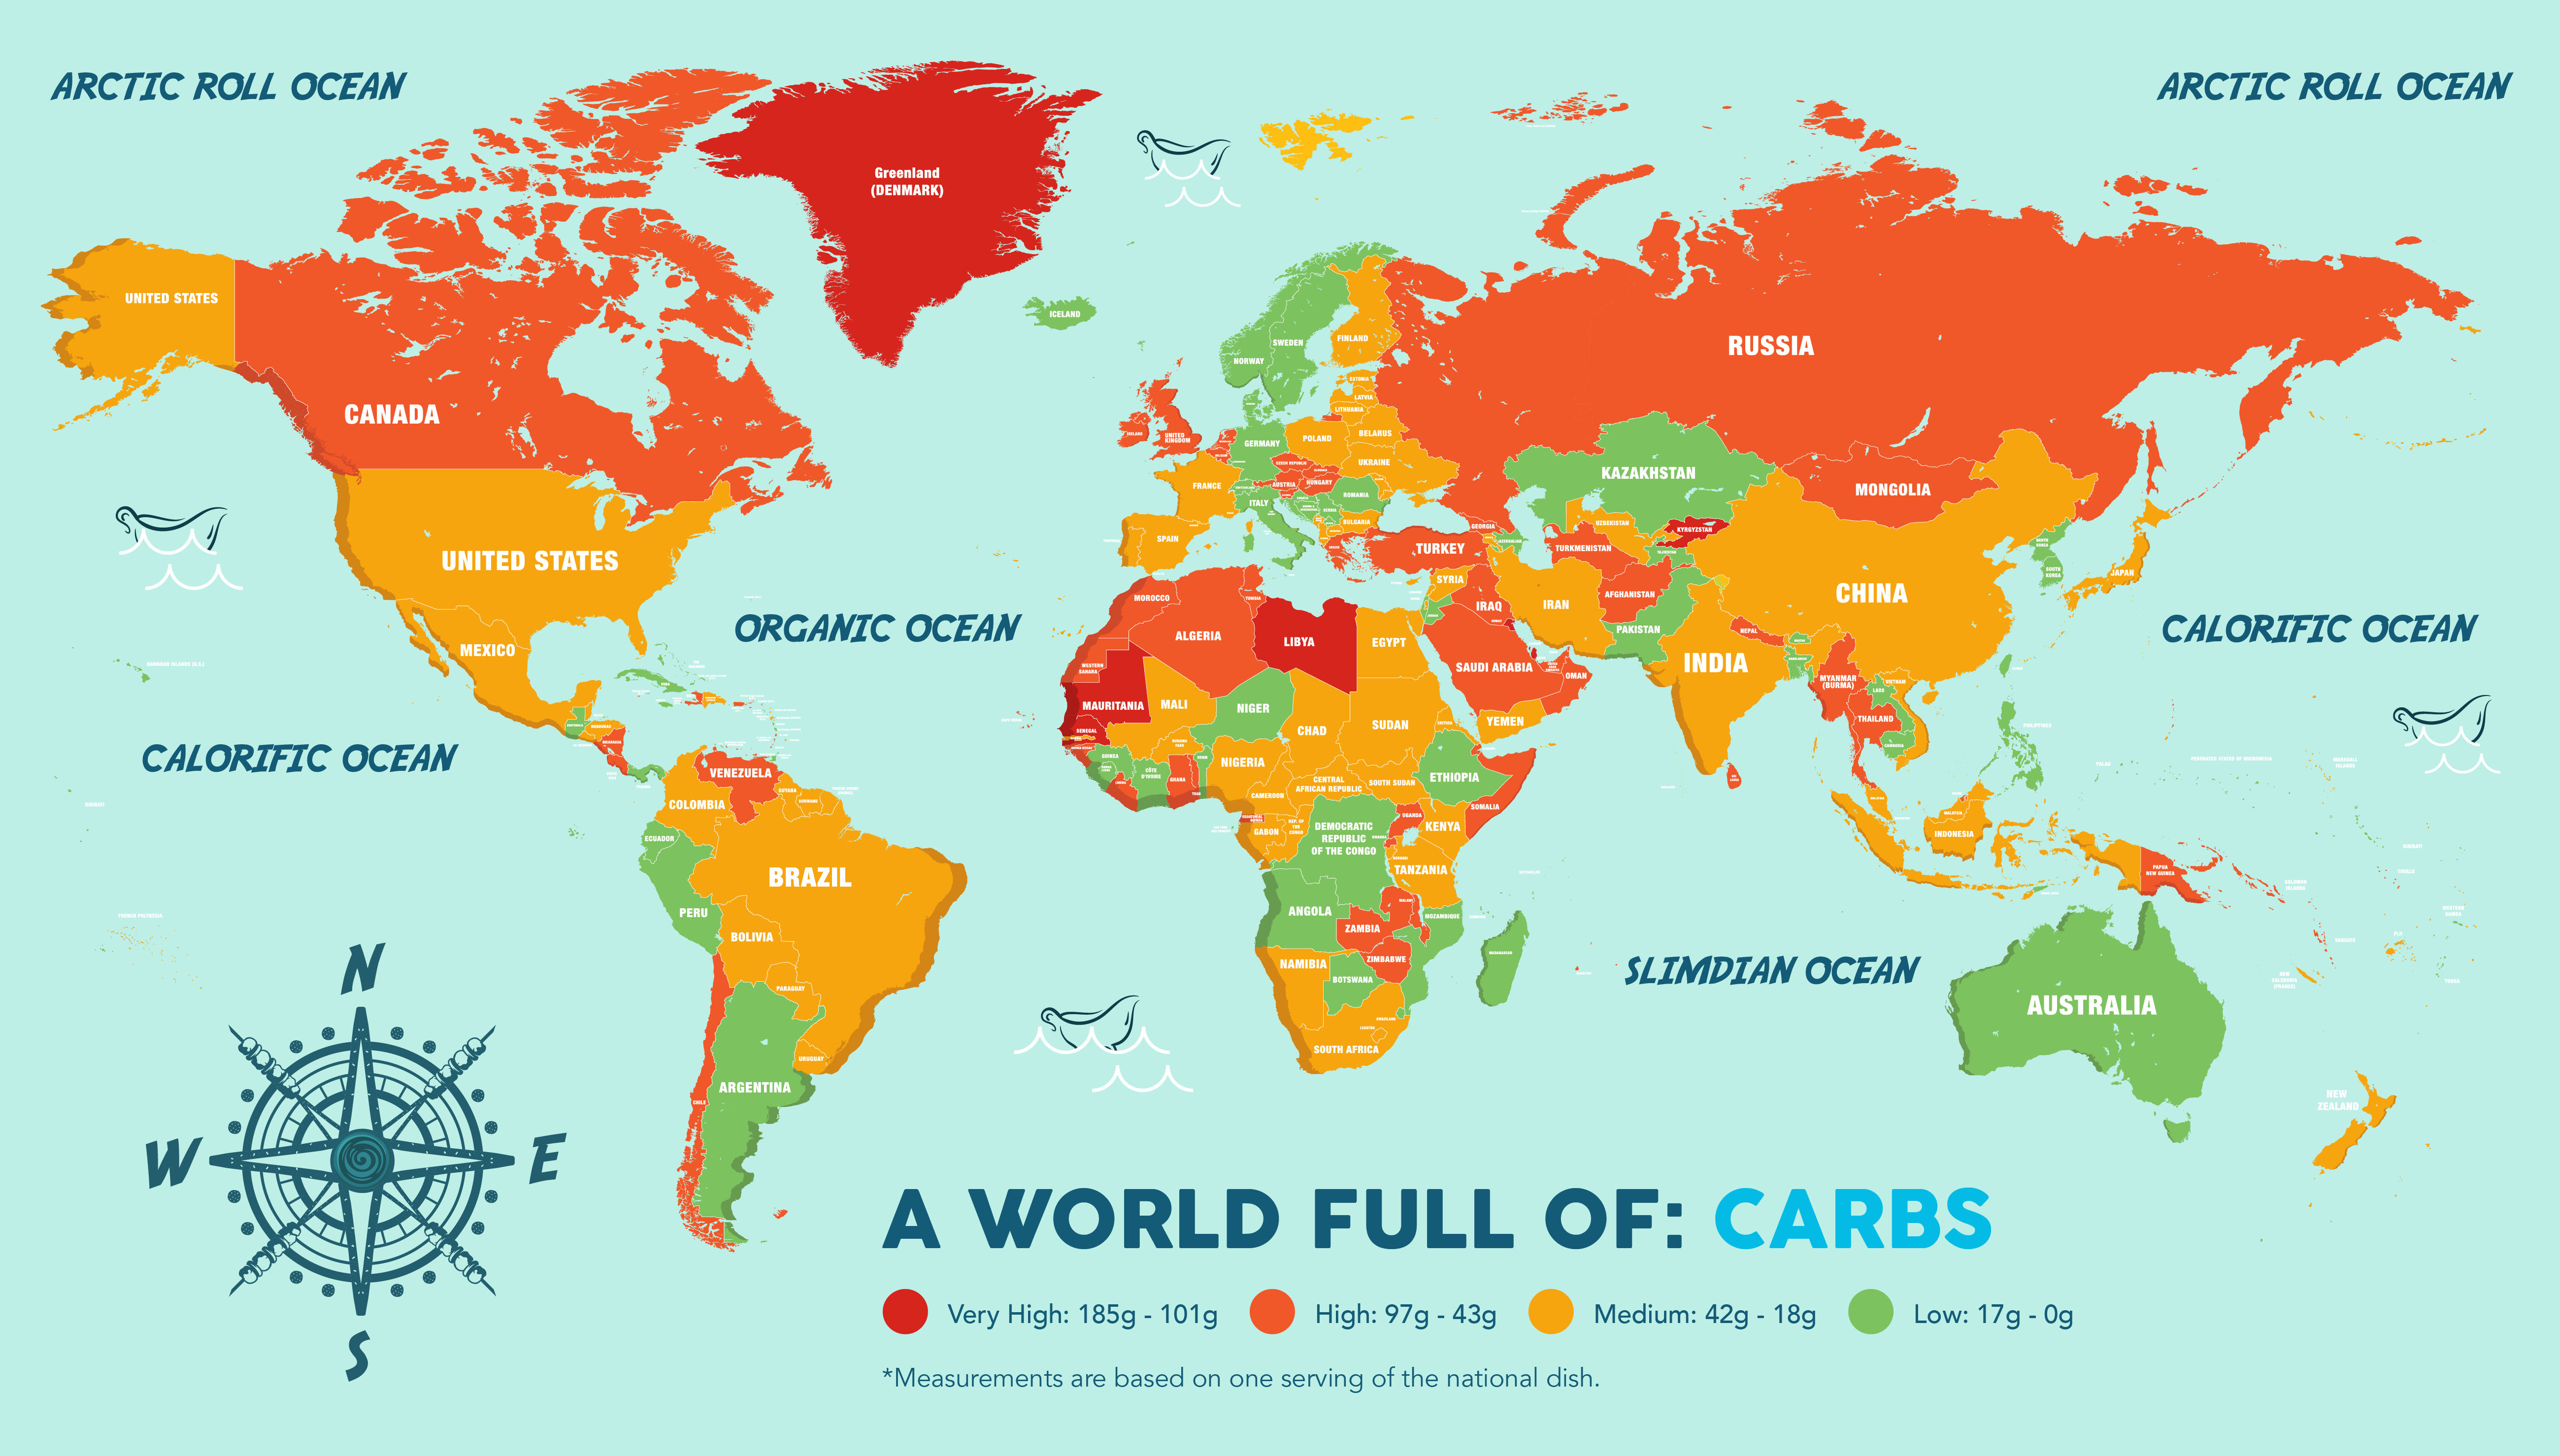 a world map showing national dishes by carbs.